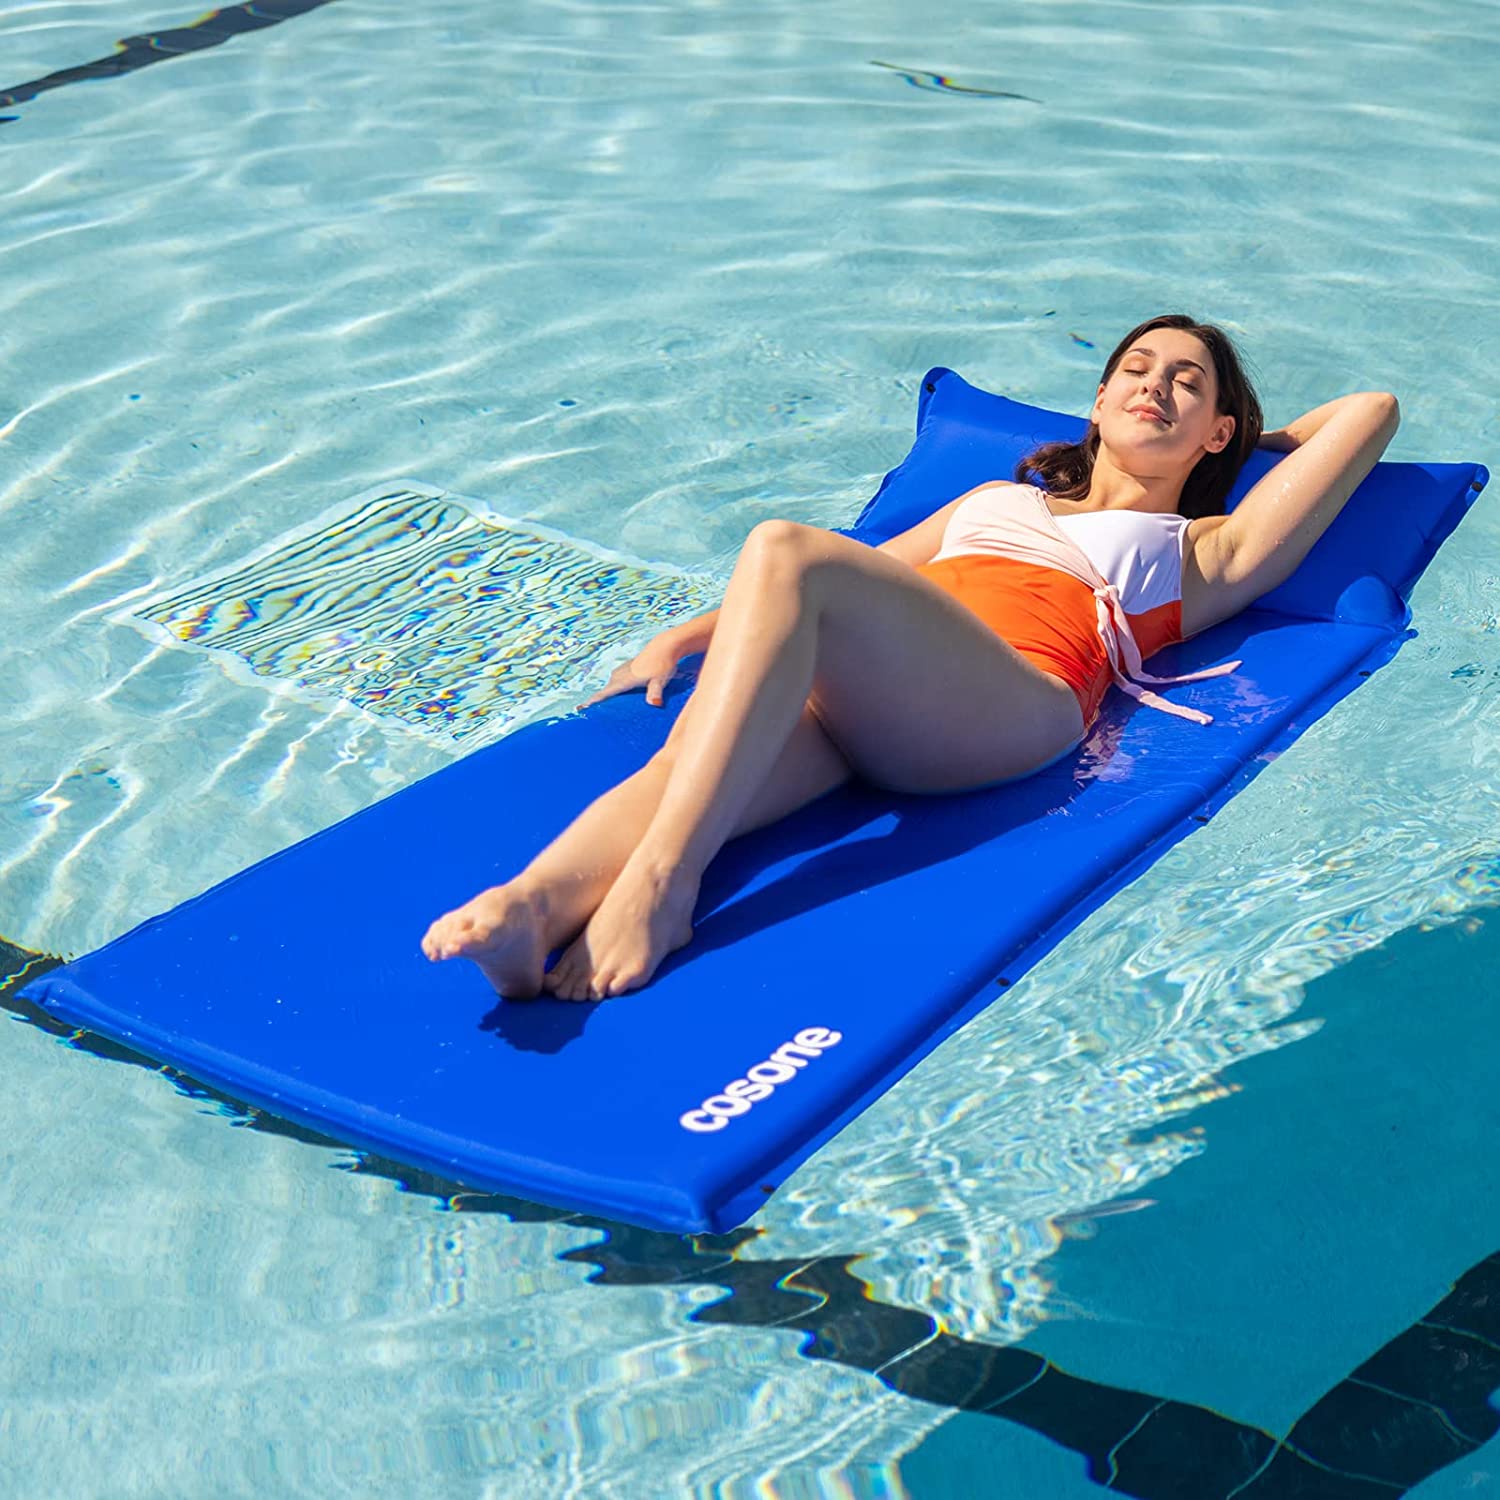 https://discounttoday.net/wp-content/uploads/2022/07/Self-Inflating-Pool-Floats-Adult-More-Durable-Skin-Friendly-Portable-Pool-Raft-with-Headrest-Inflatable-Sponge-Mattress-Floating-Mat-for-Swimming-Pool-Sea-Lake-River-Easy-Storage-No-Cracking.jpg